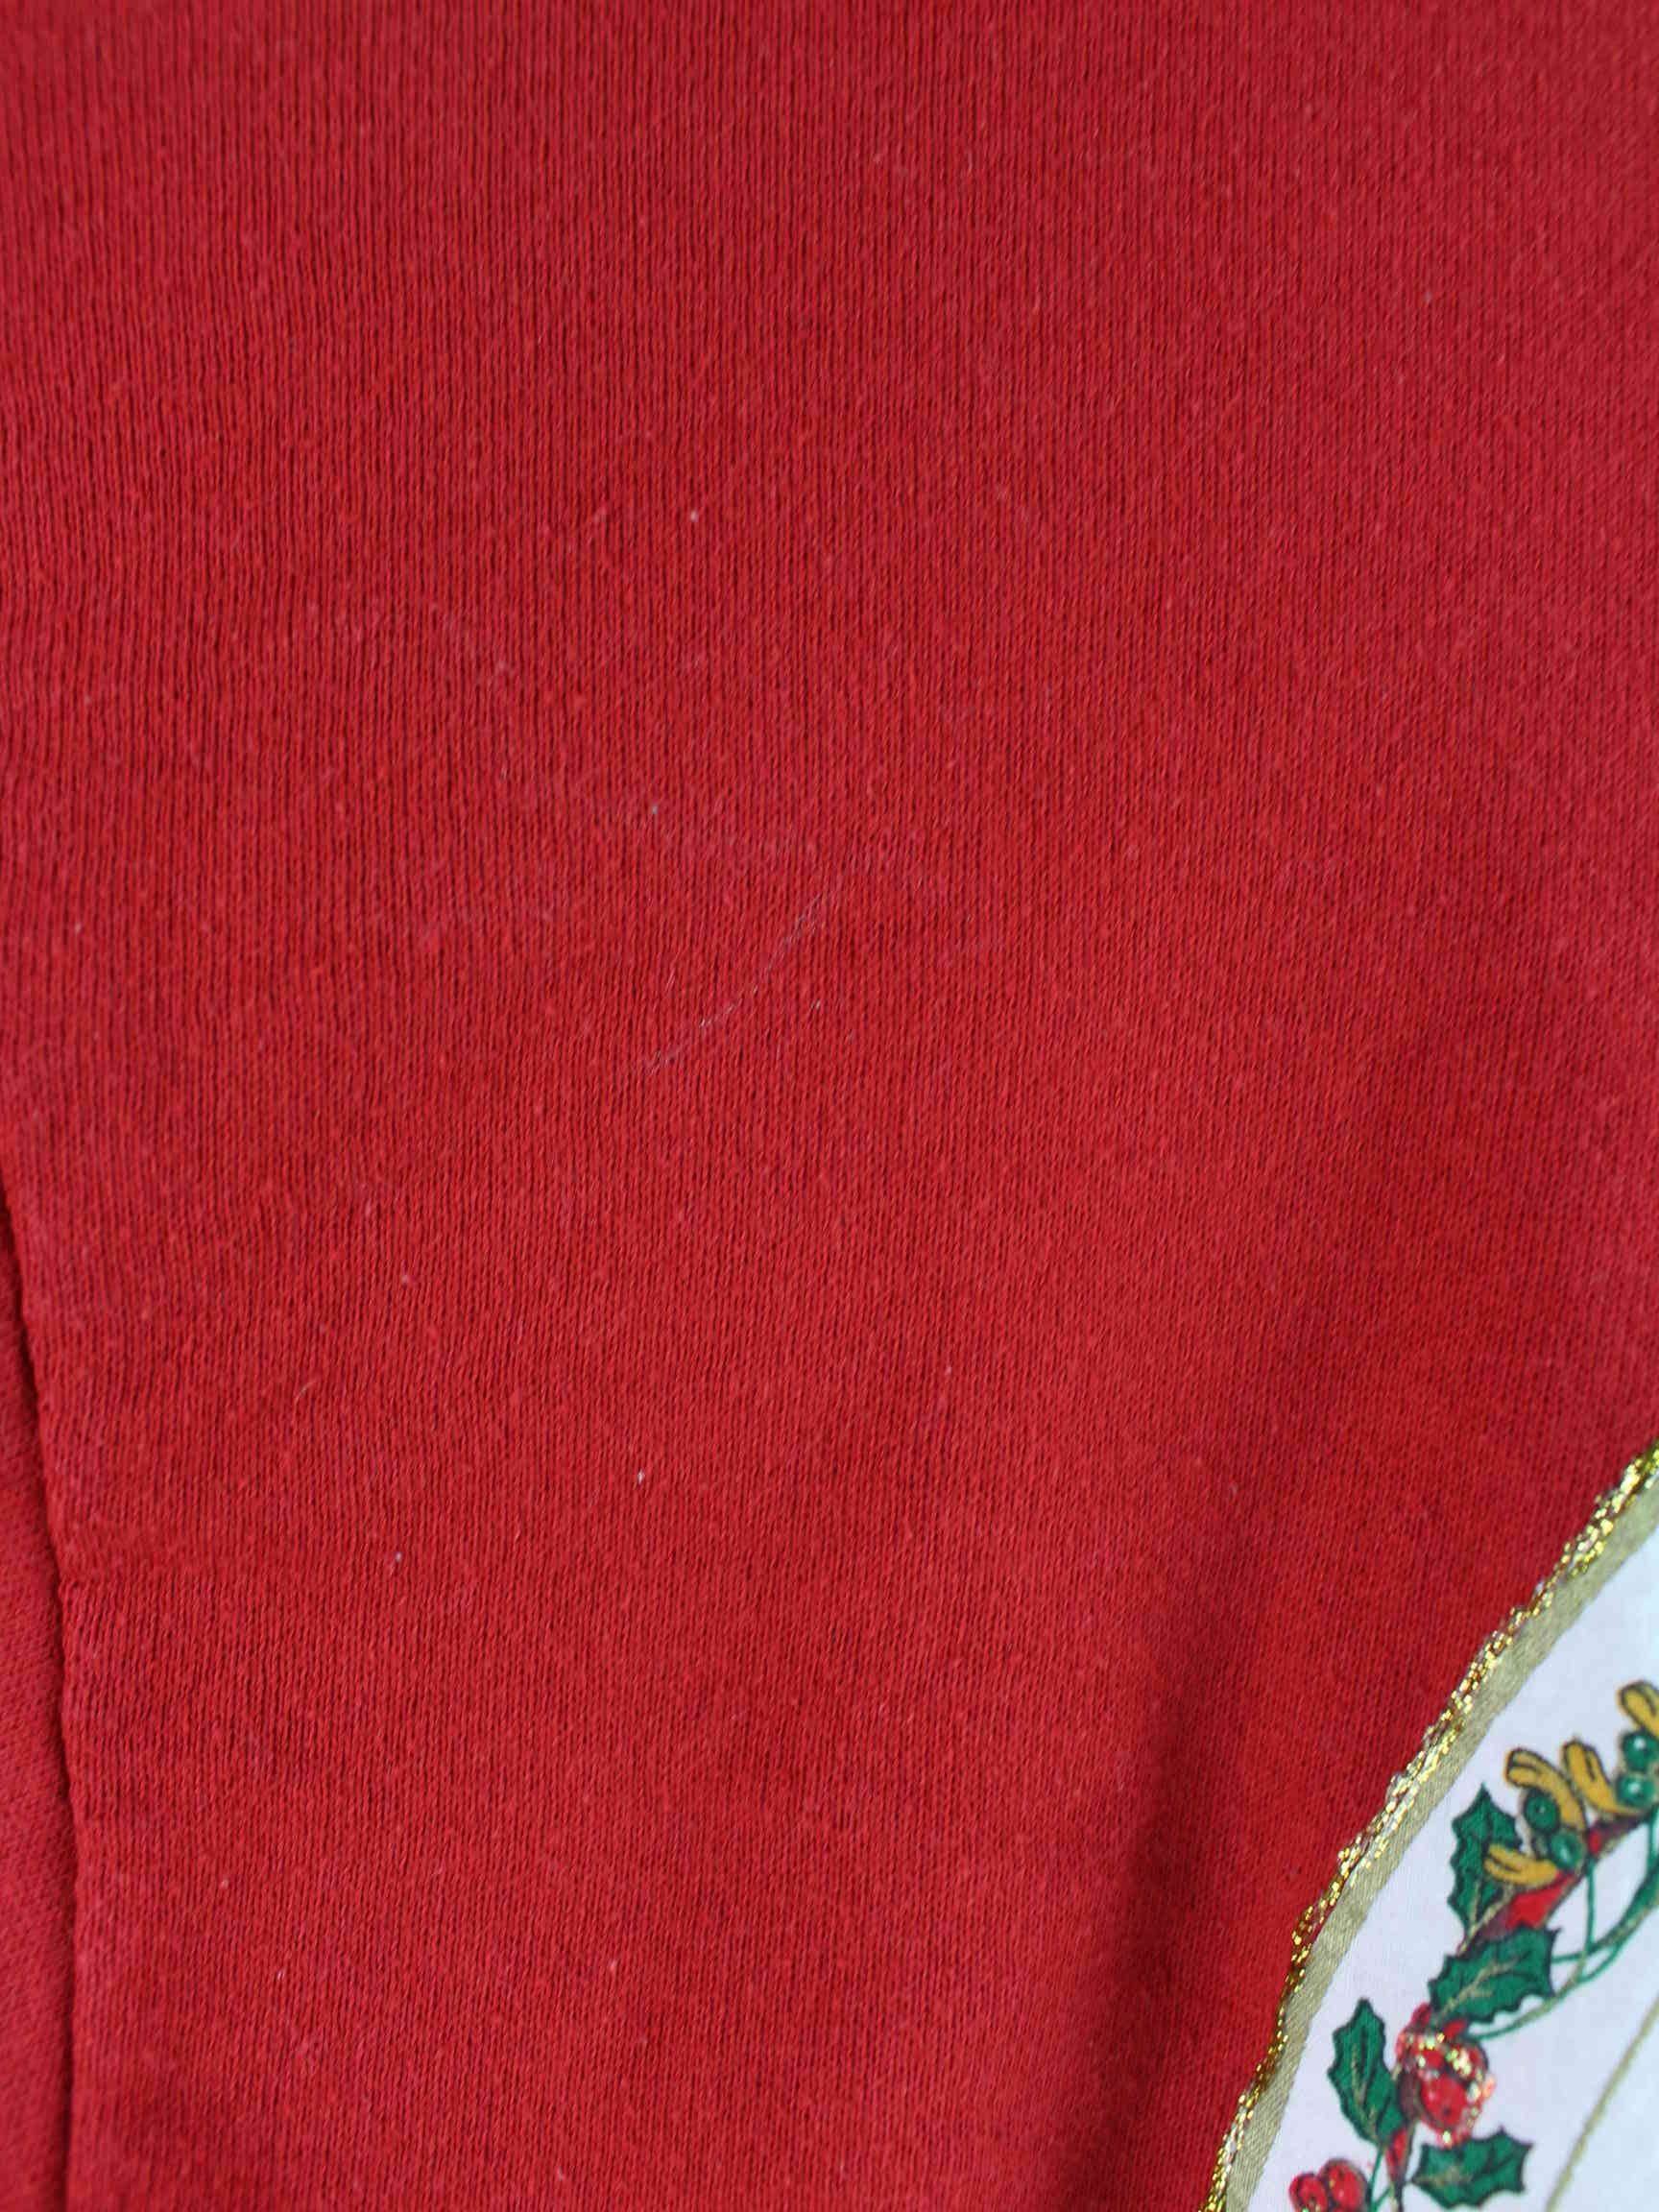 Jerzees 90s Vintage Santa Embroidered Sweater Rot L (detail image 3)